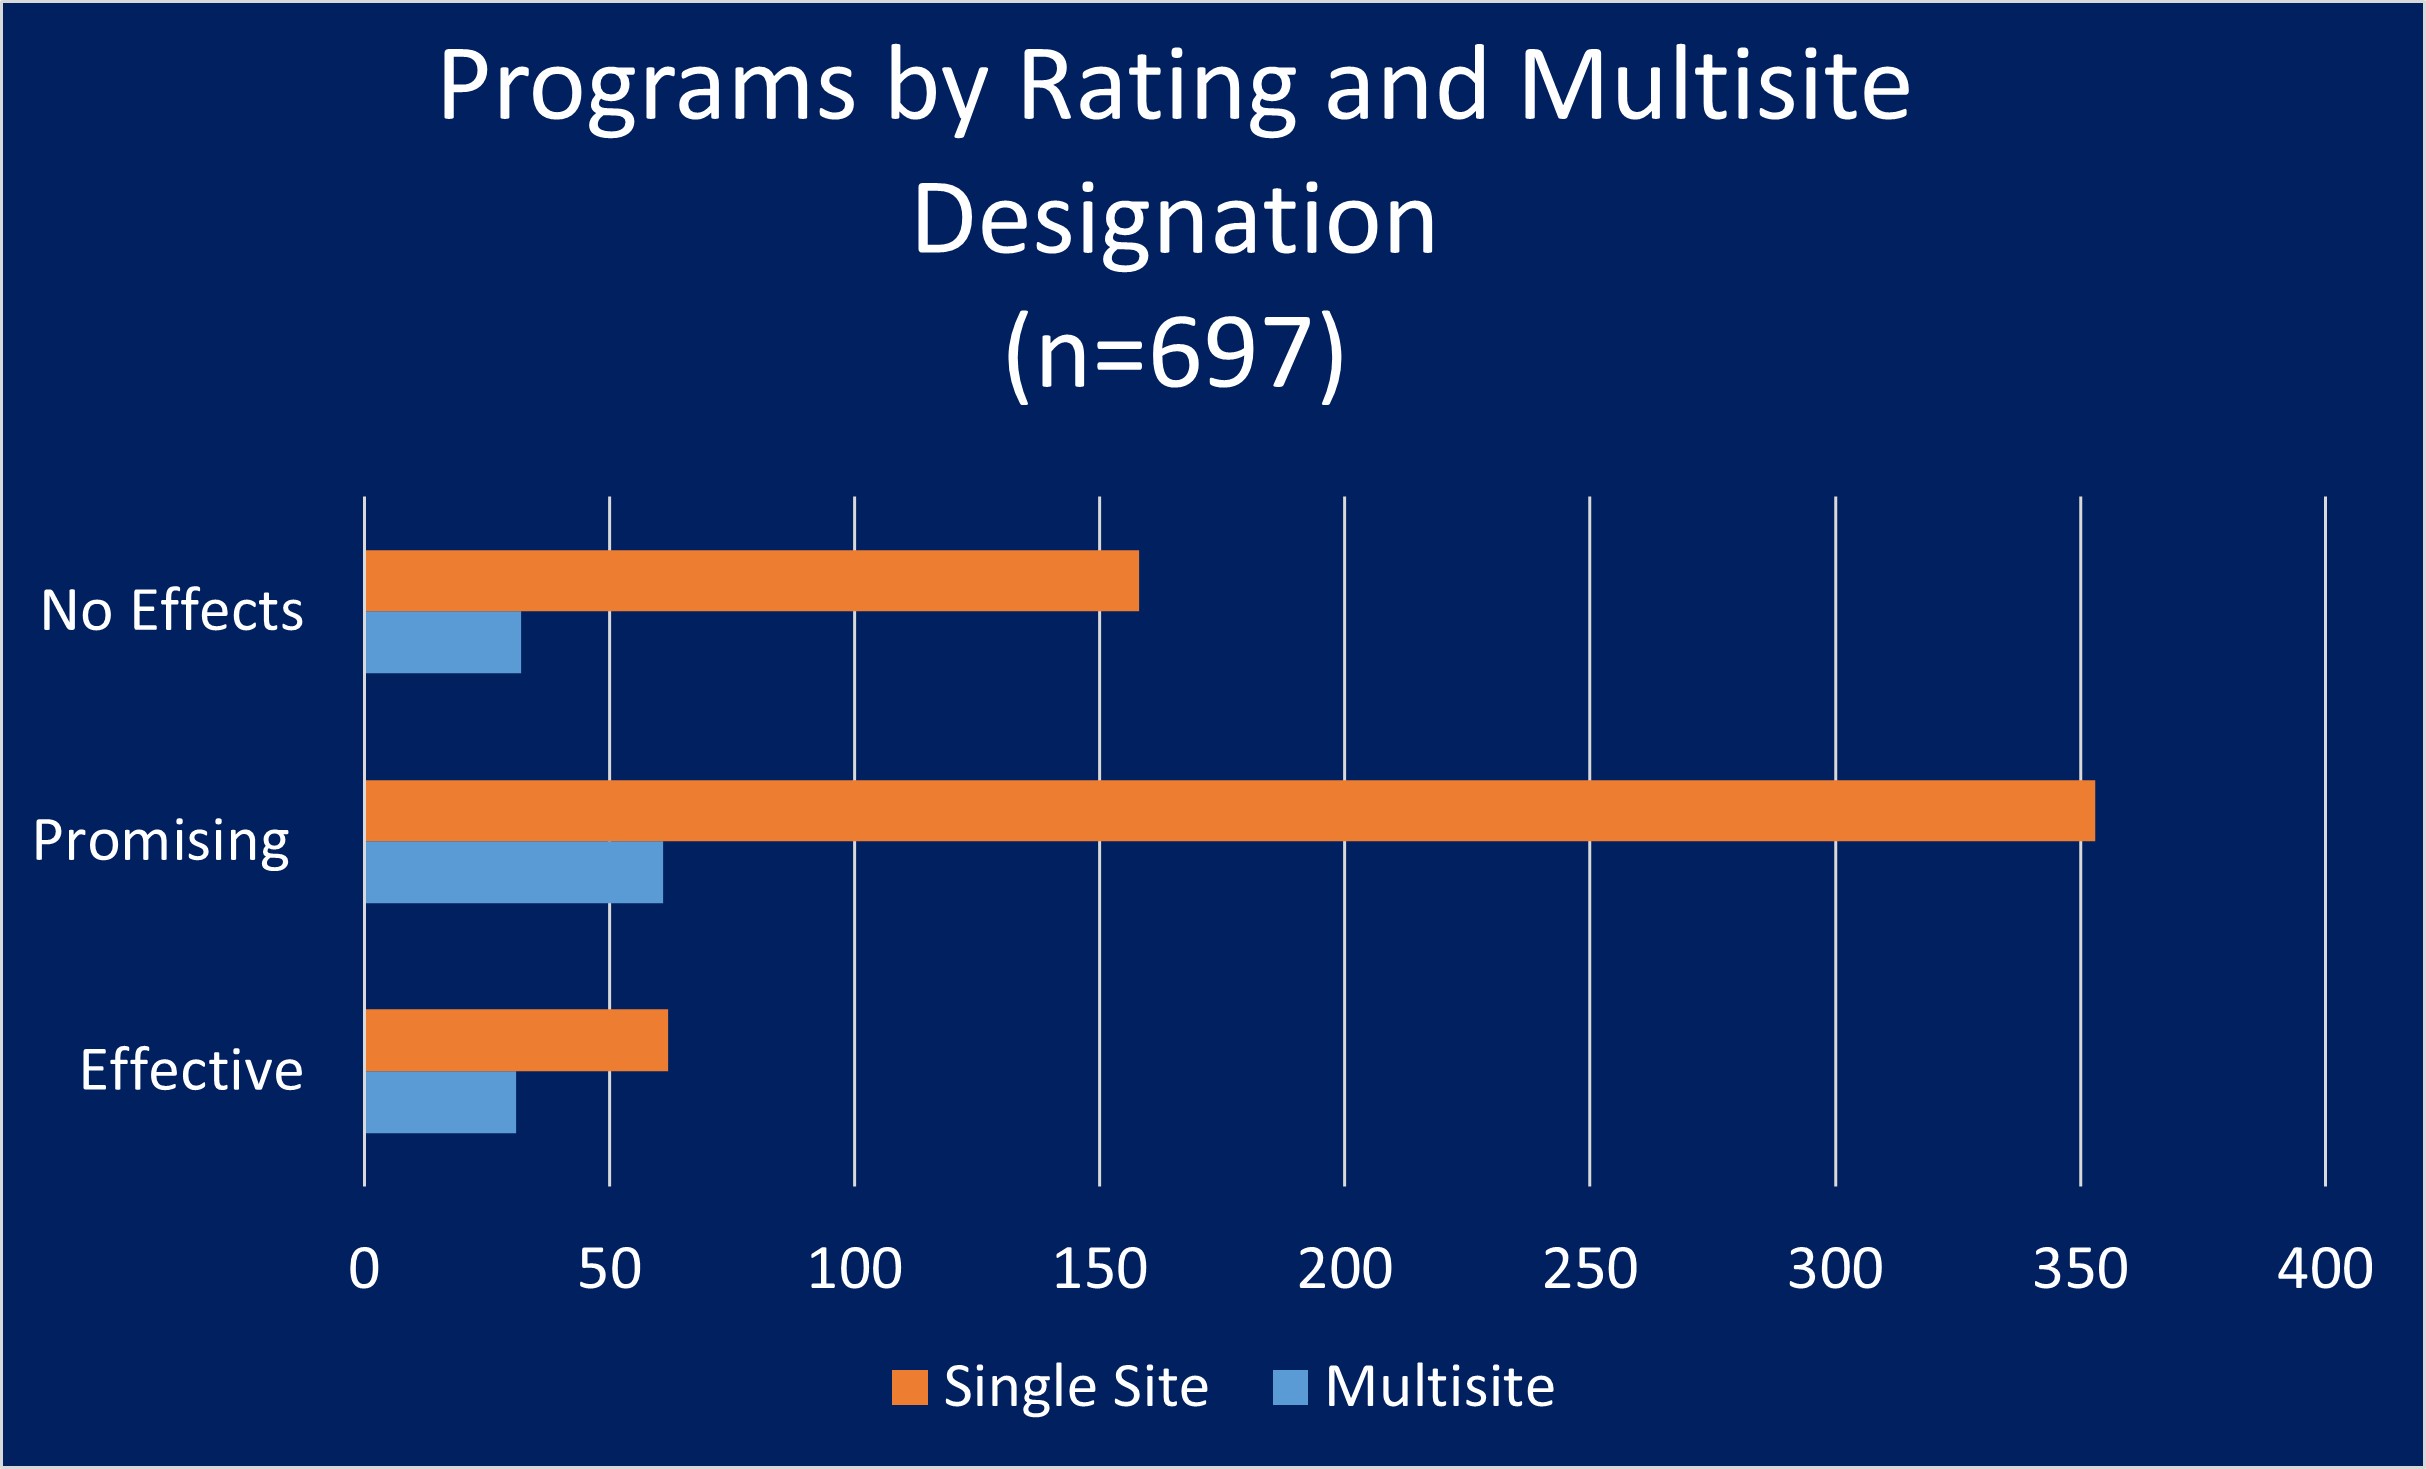 programs by rating and whether or not the program was rated in multiple sites